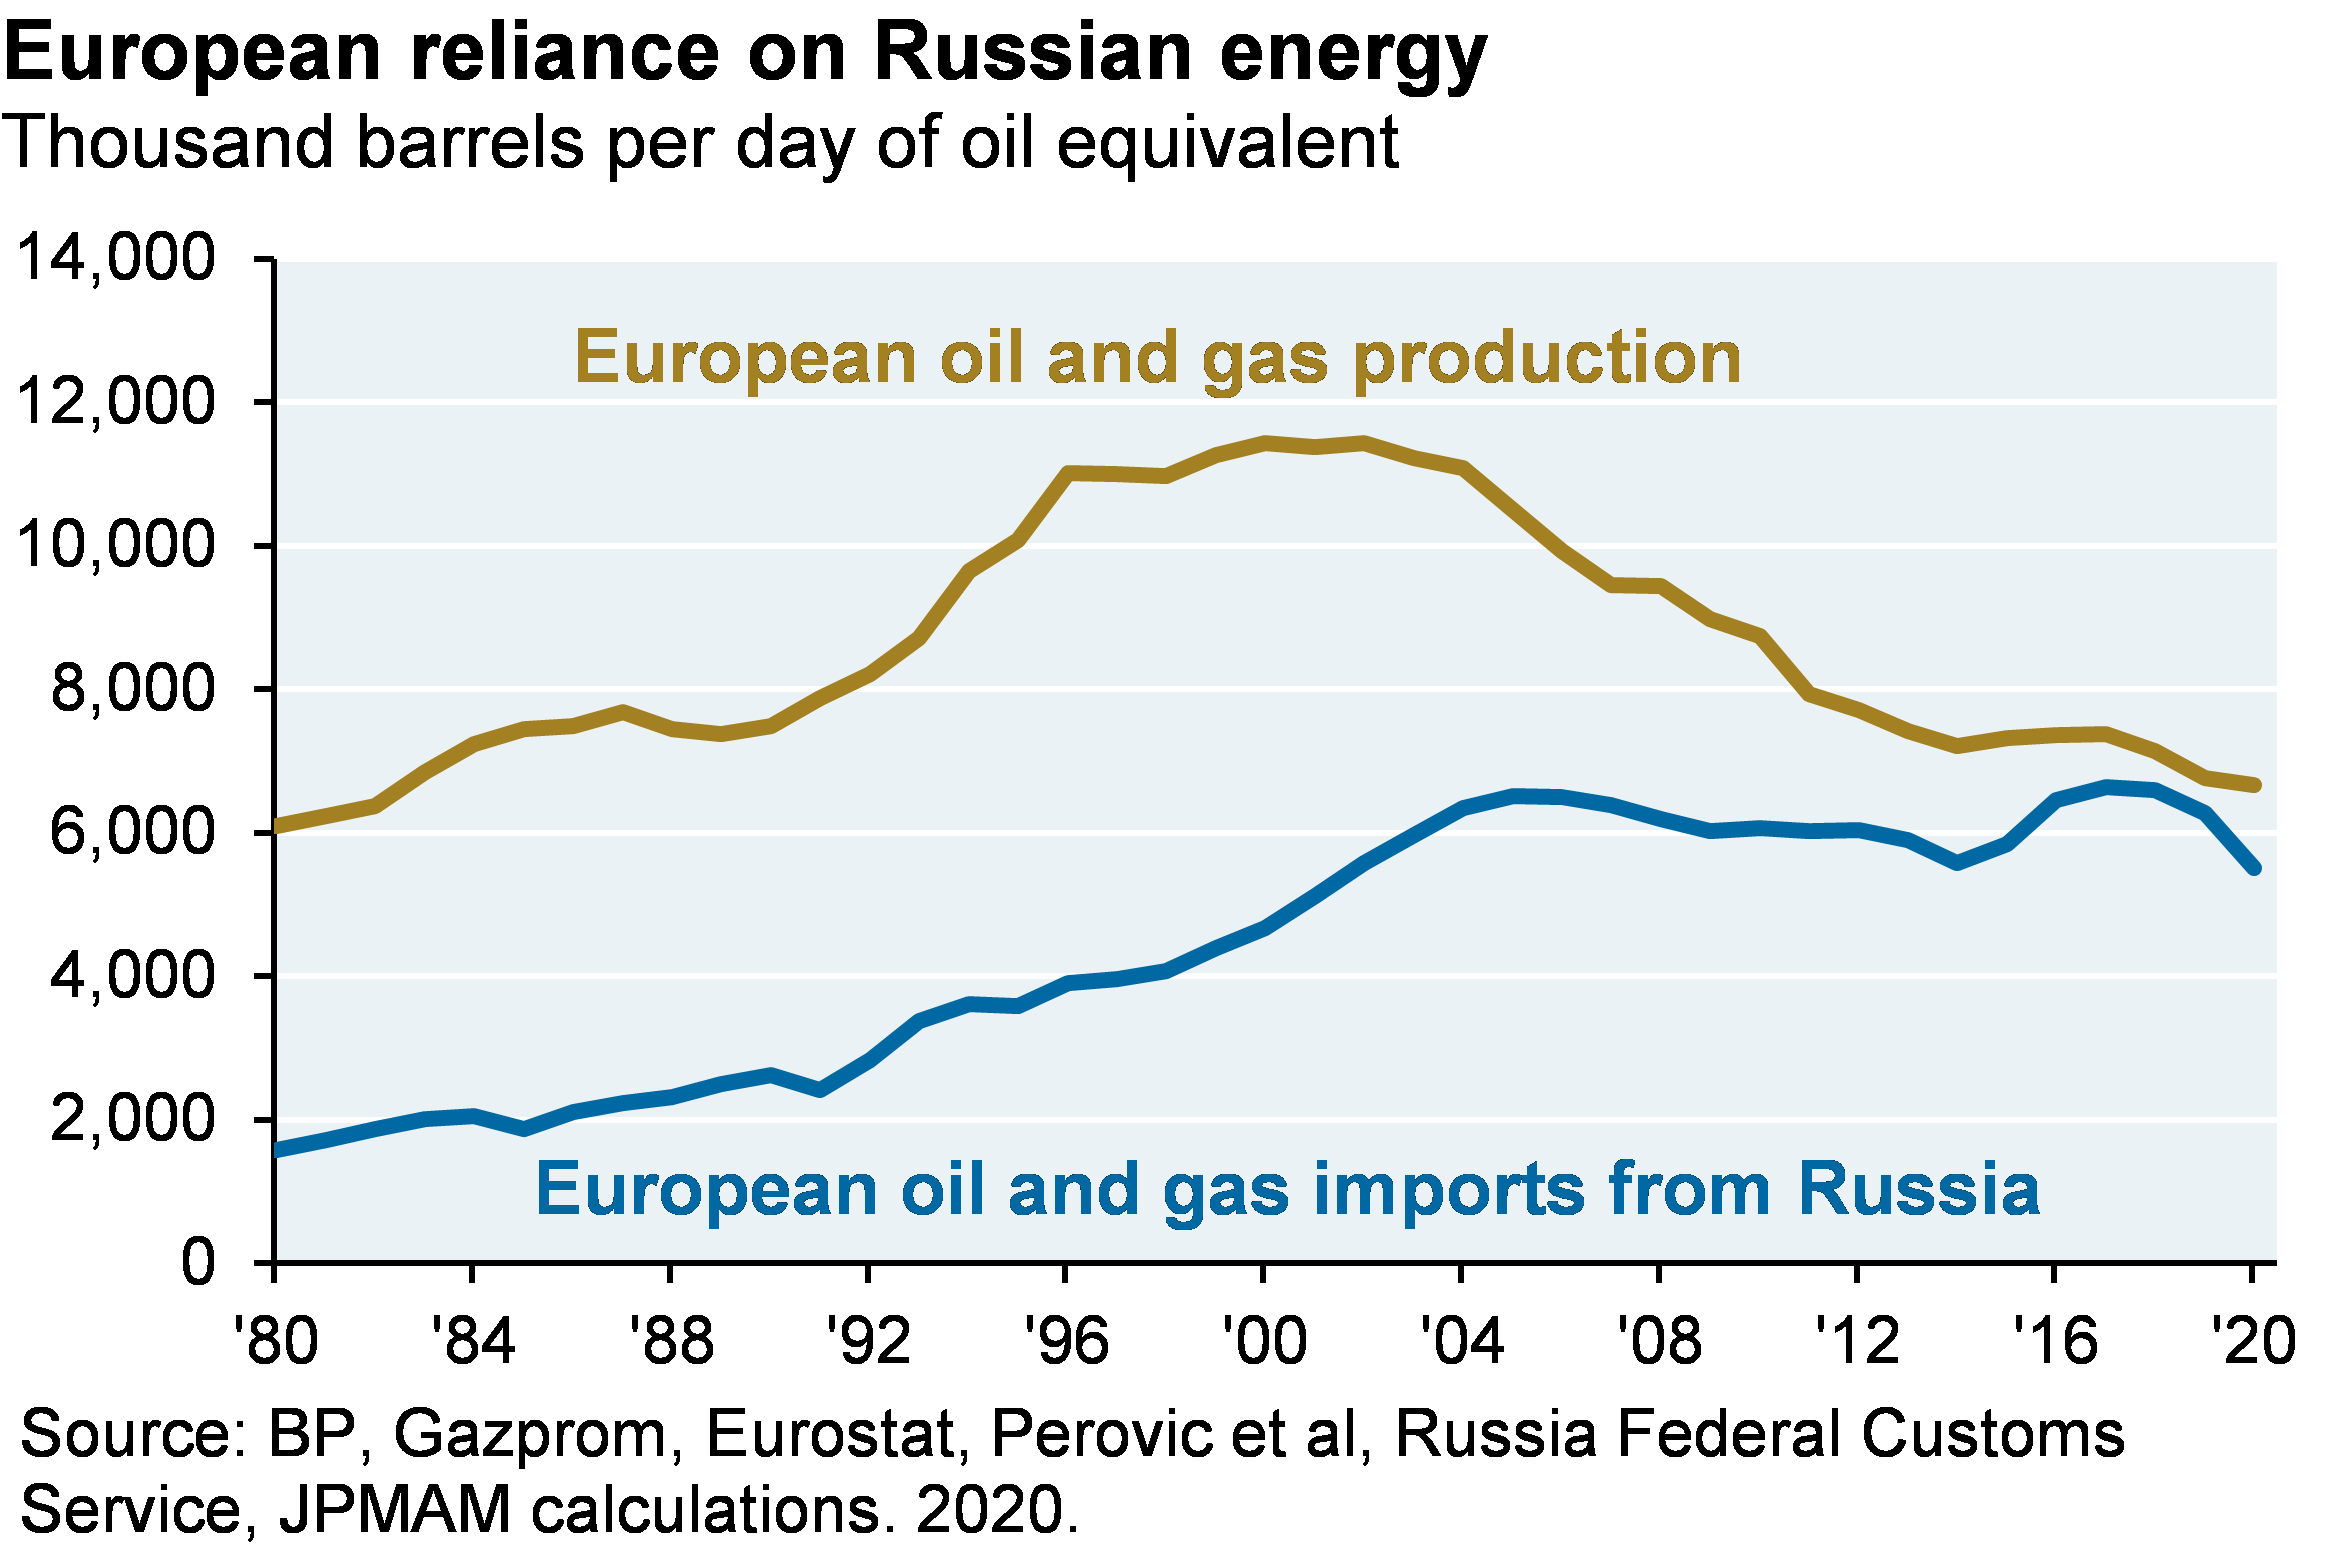 3.	Line chart shows net imports of oil, natural gas and coal in million tonnes of oil equivalent for the US, China, and Europe. The chart illustrates how the US has finally achieved energy independence and exports more on an oil equivalent basis than it imports. It also highlights how Europe’s energy dependence is even greater than China’s.